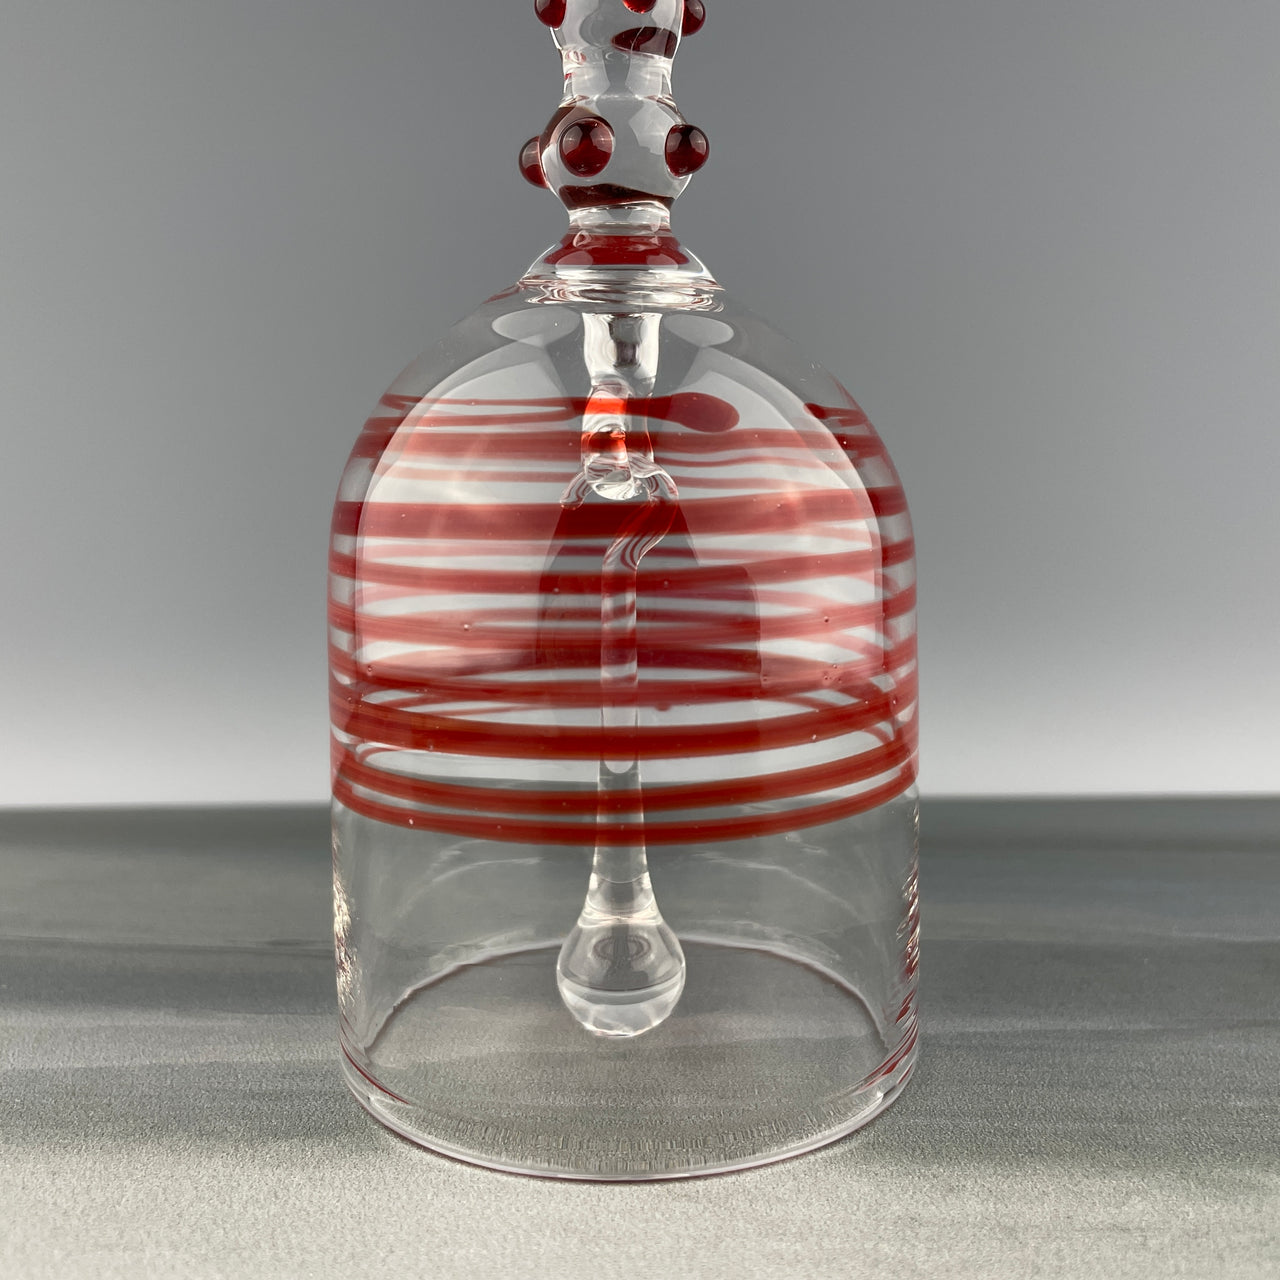 clear and red Christmas bell made of glass